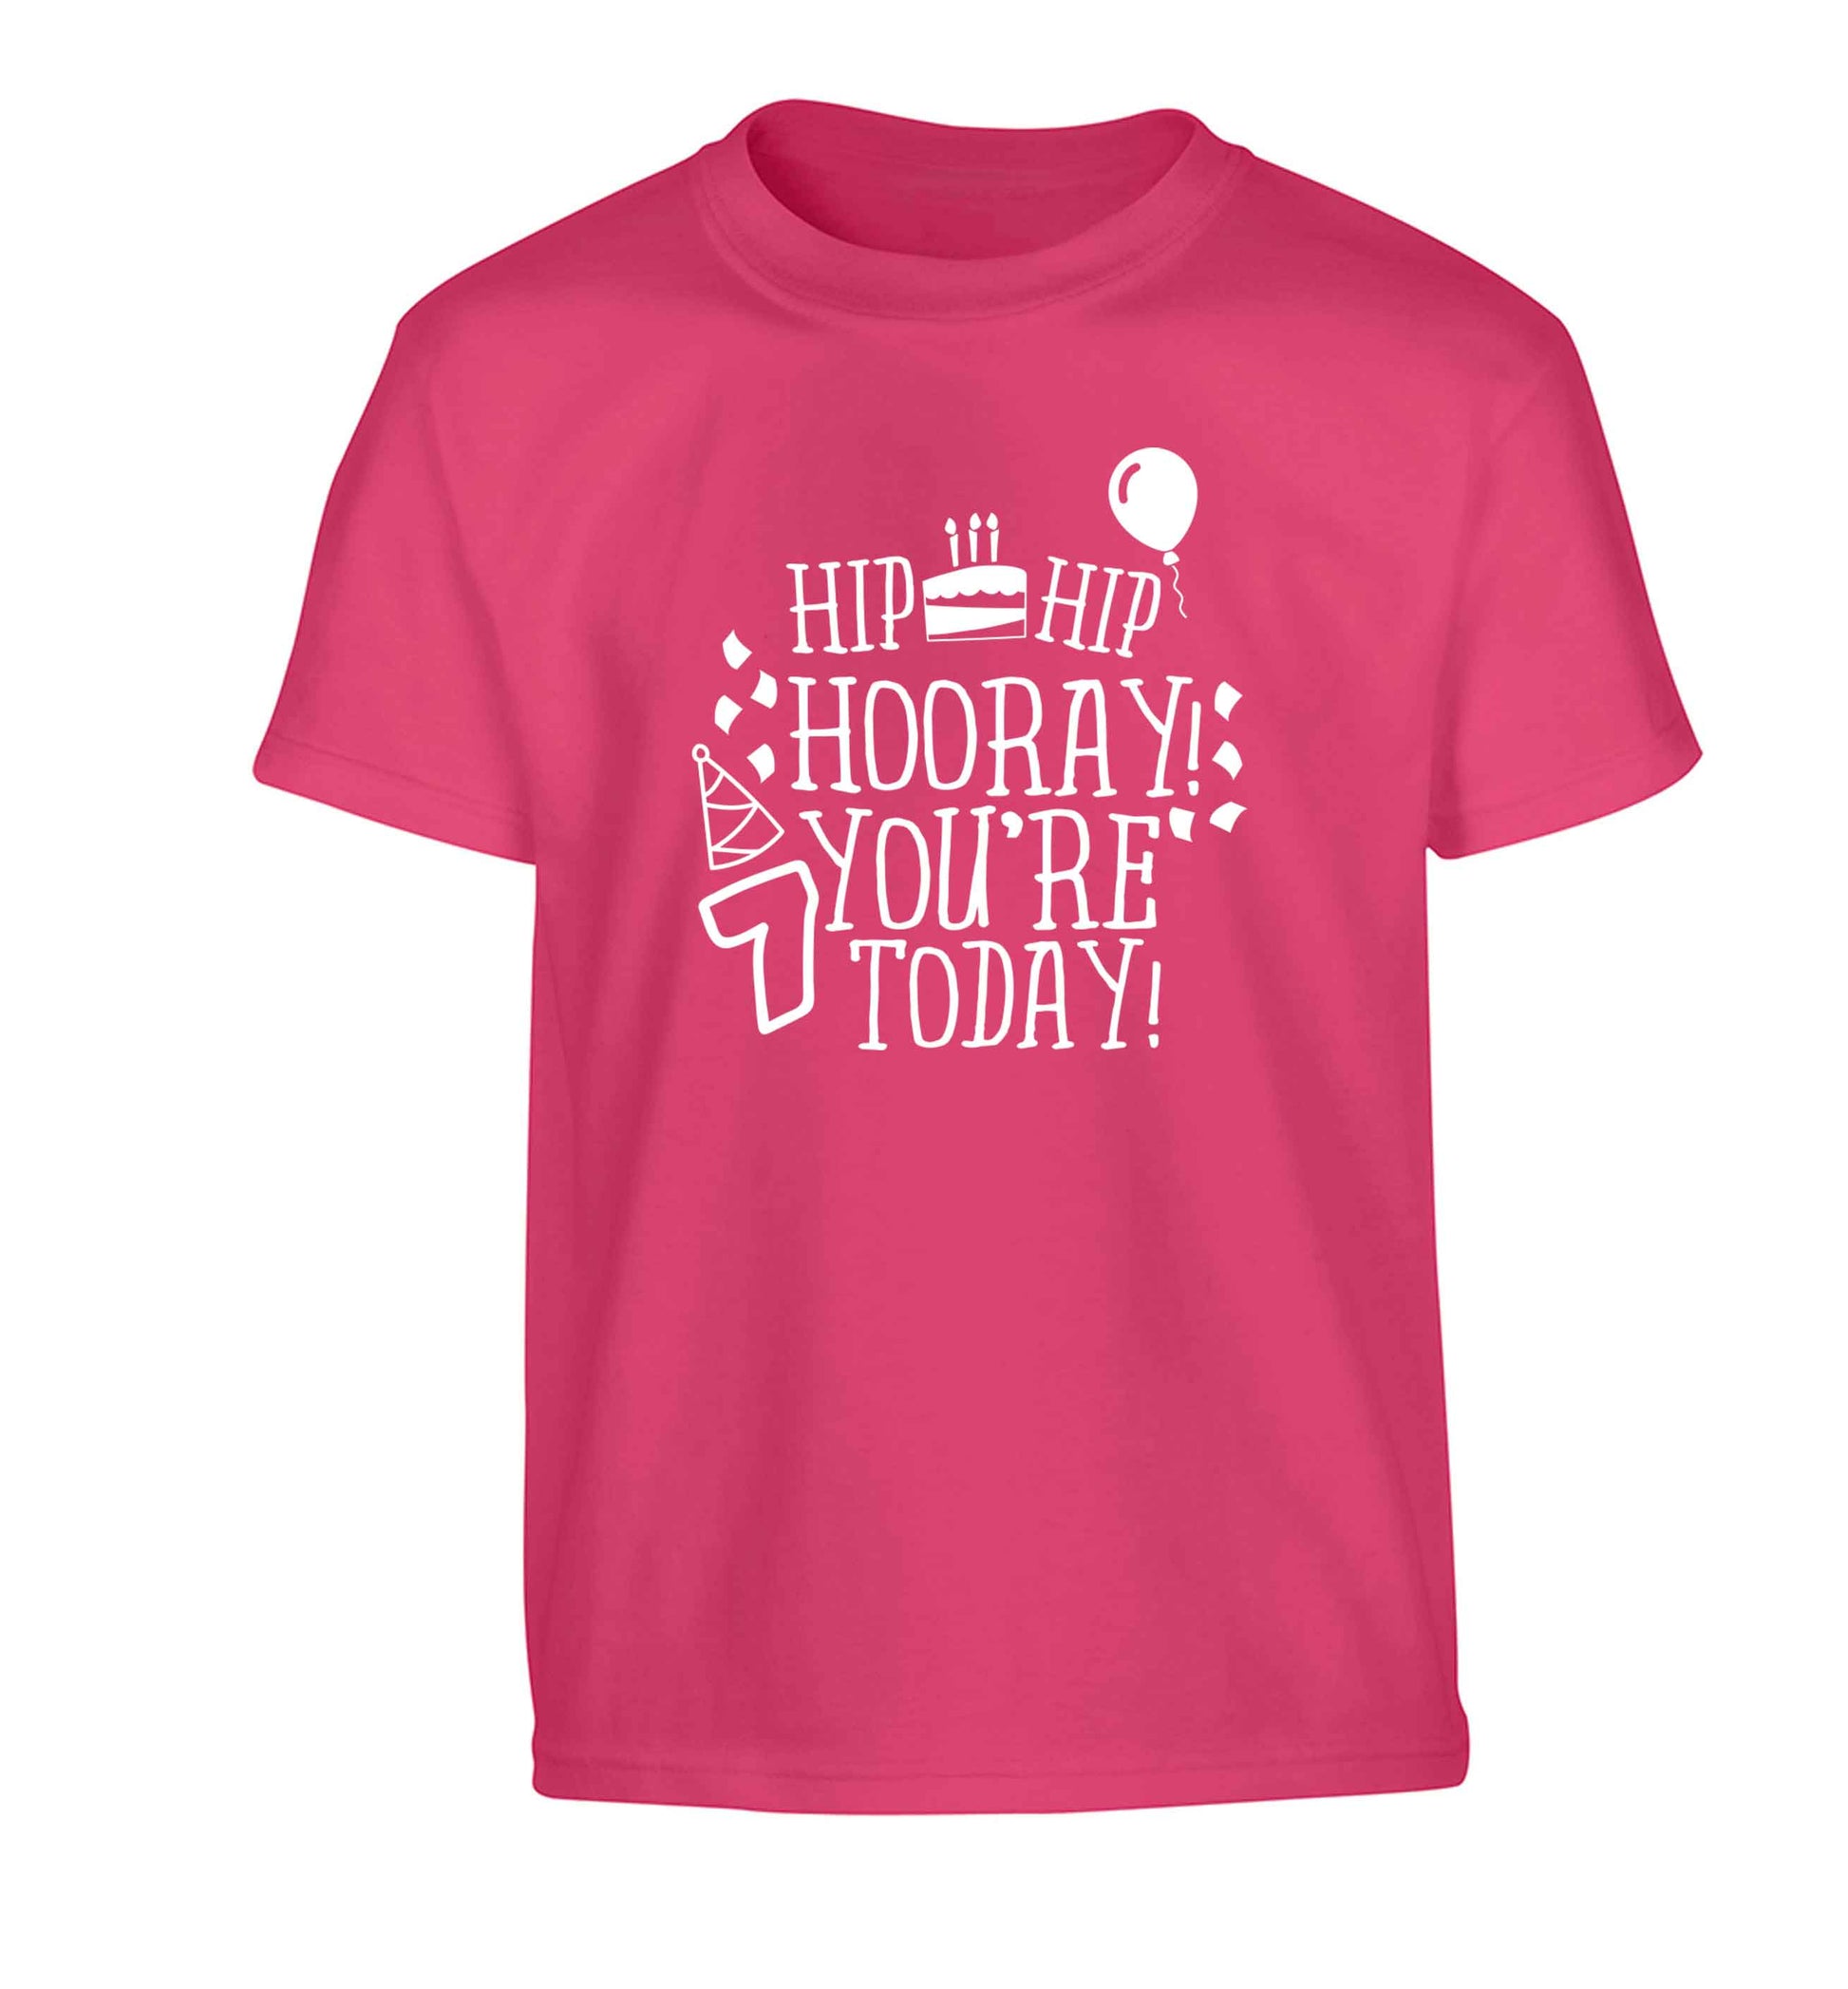 Hip hip hooray you're seven today! Children's pink Tshirt 12-13 Years